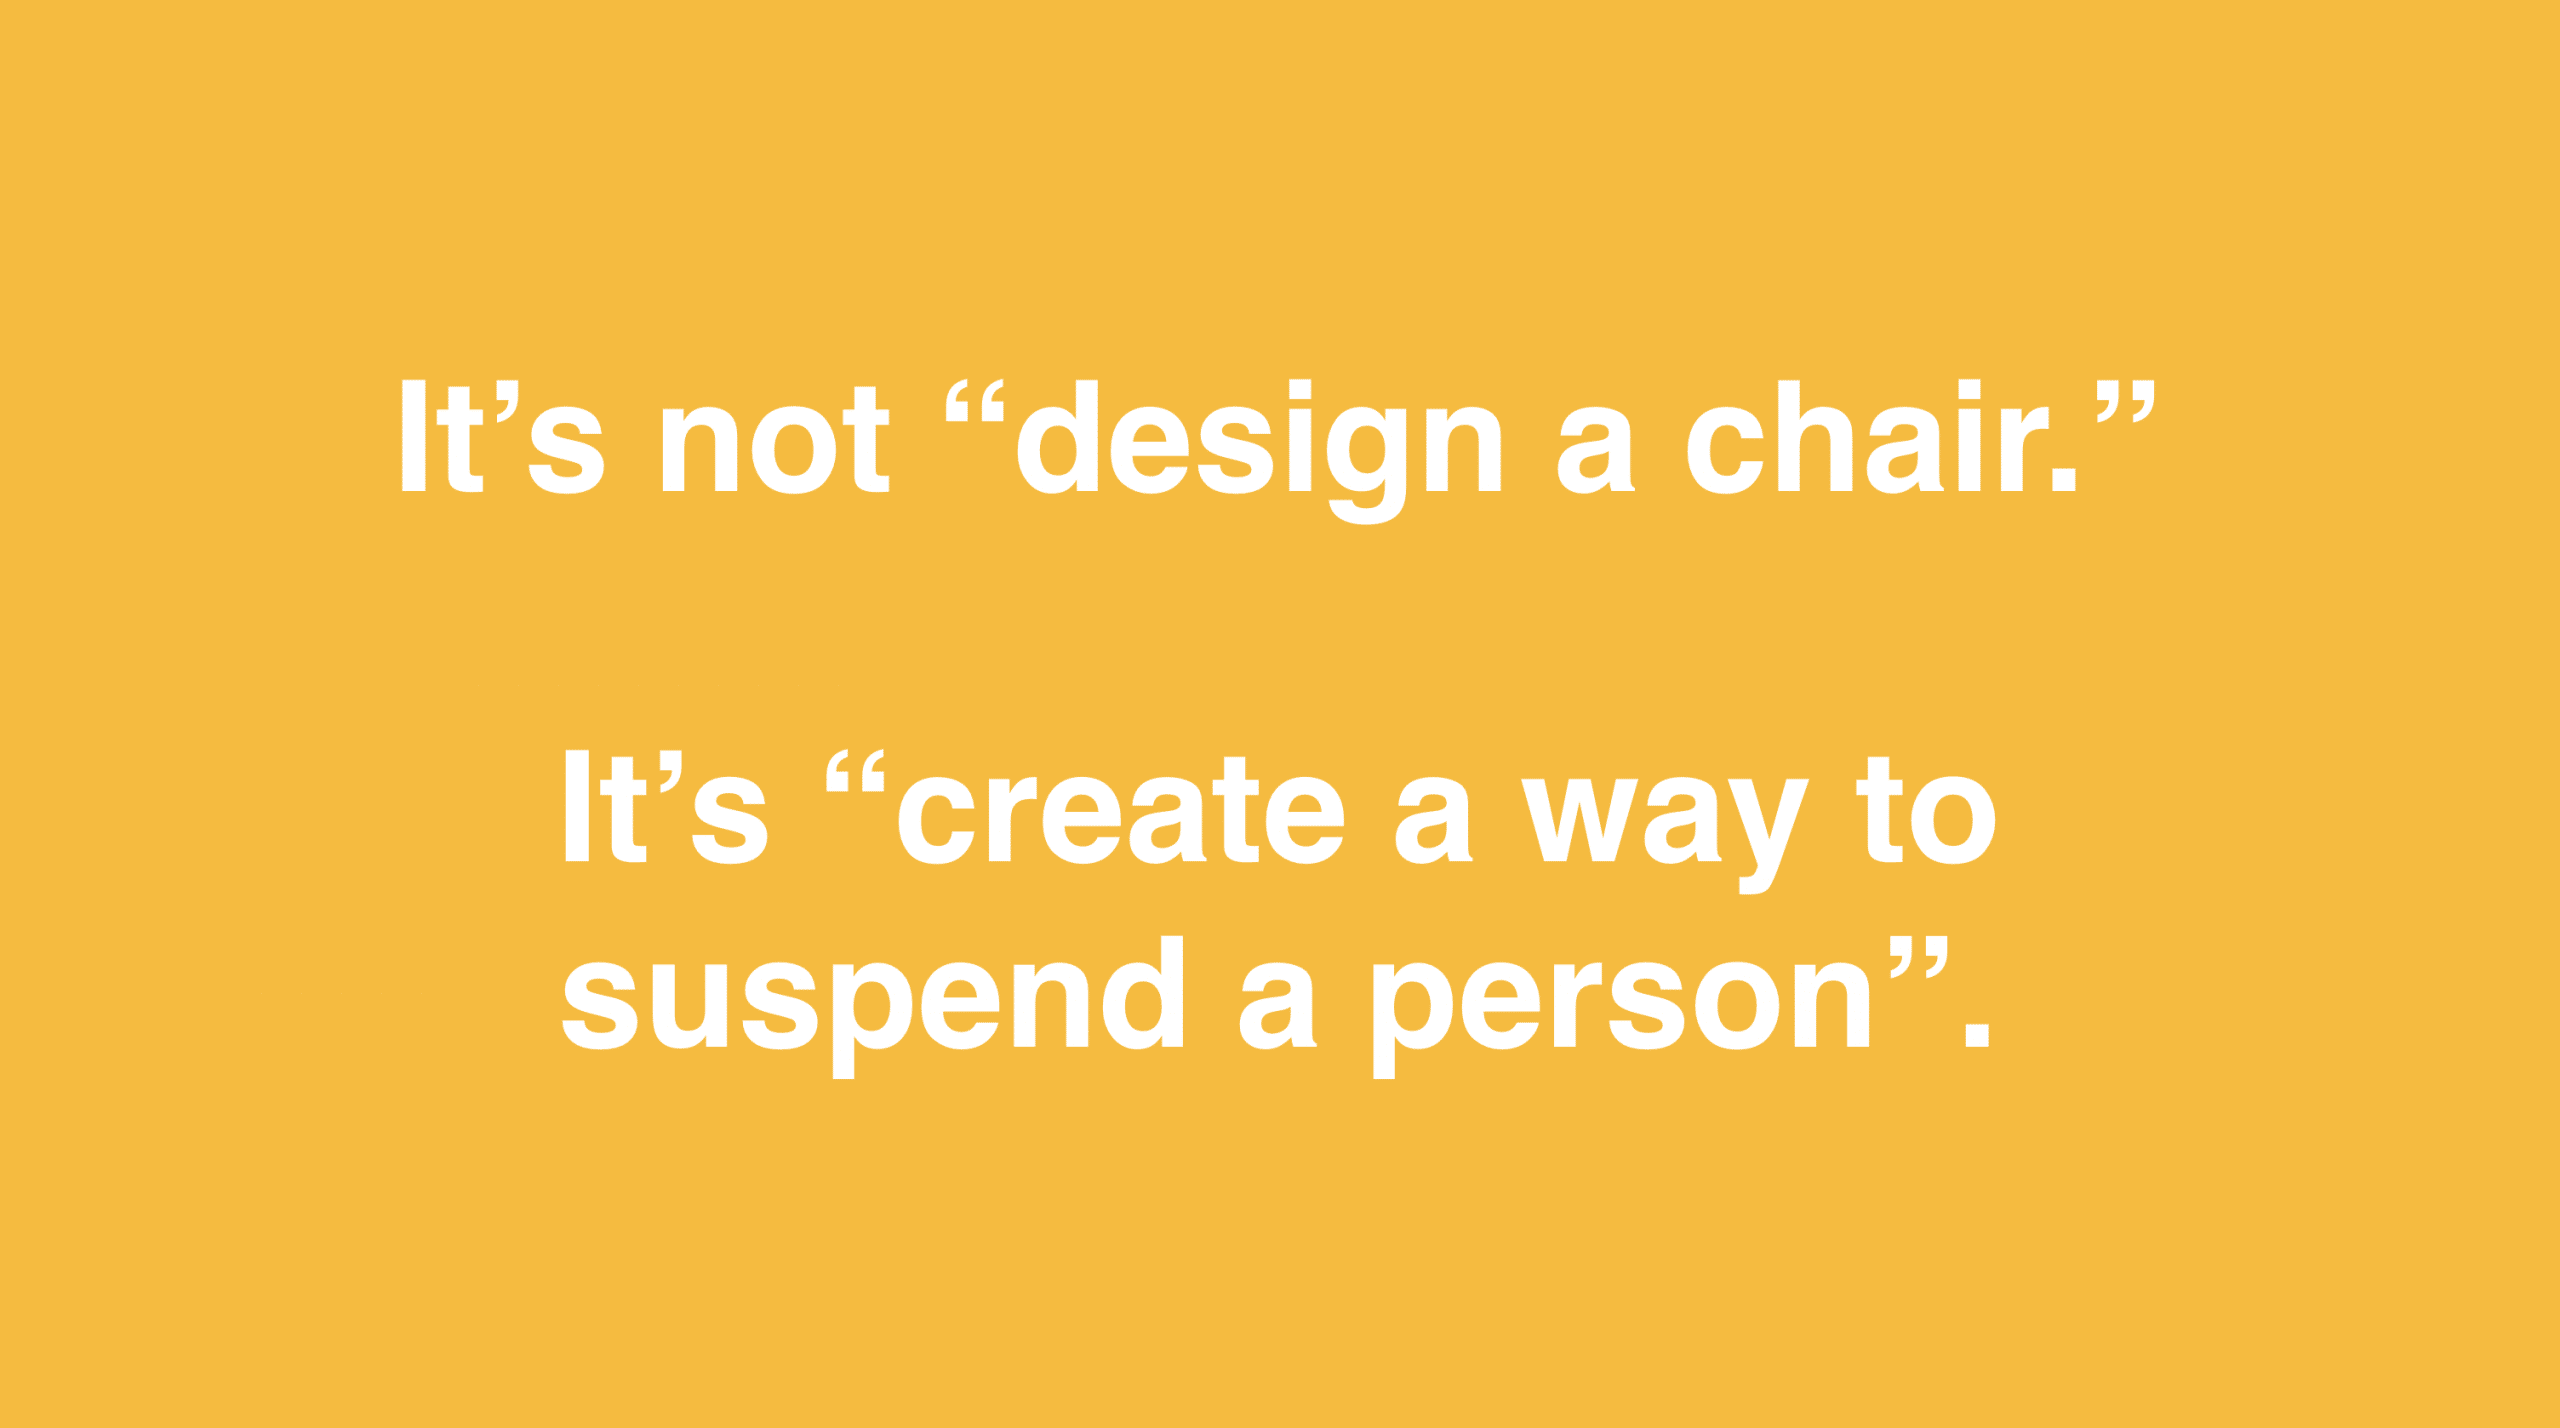 It's not "design a chair." It's "create a way to suspend a person."